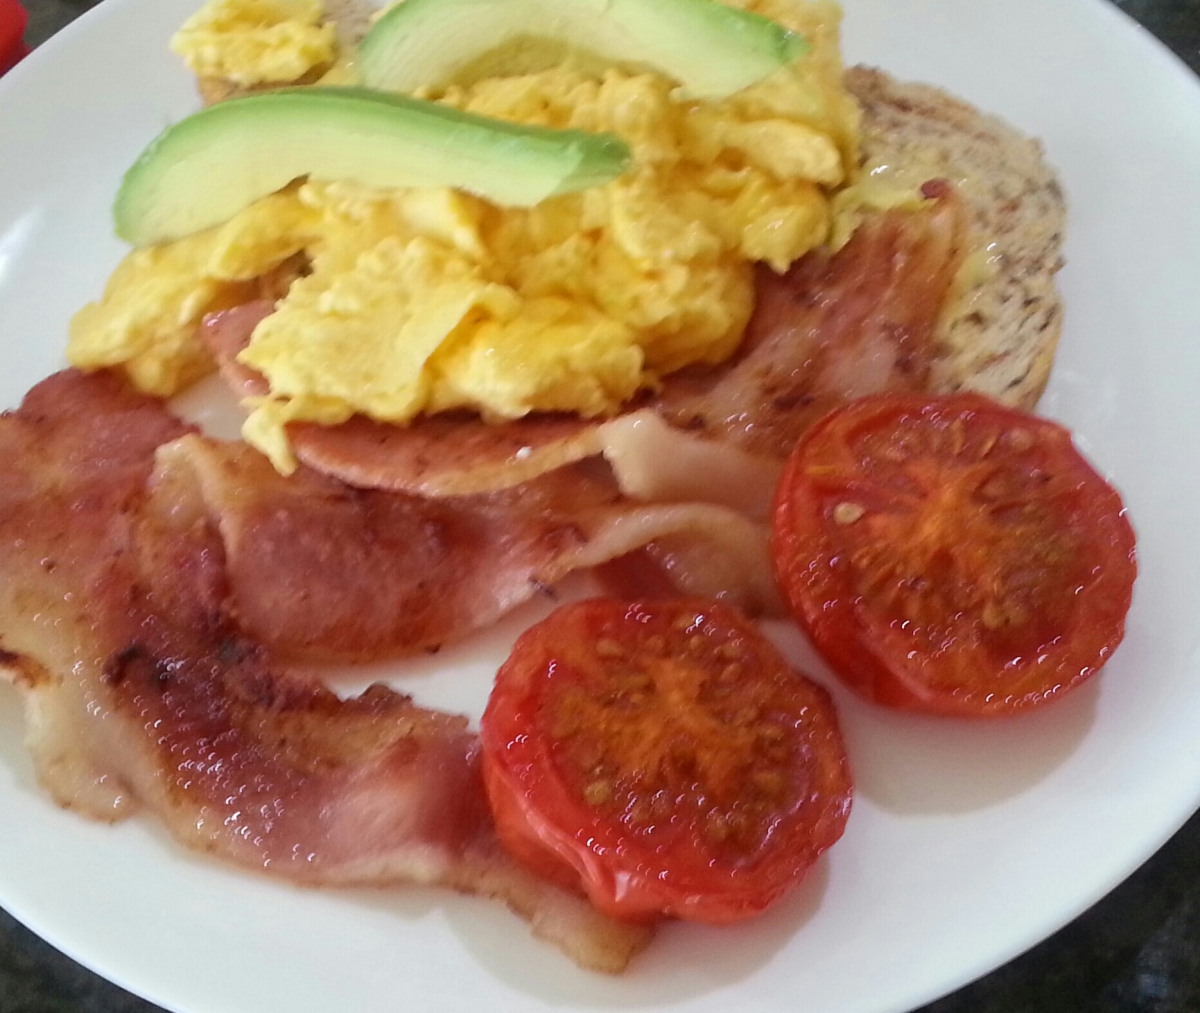 Photo of property: Bacon, eggs & slow-roasted tomatoes - cooked breakfast choice